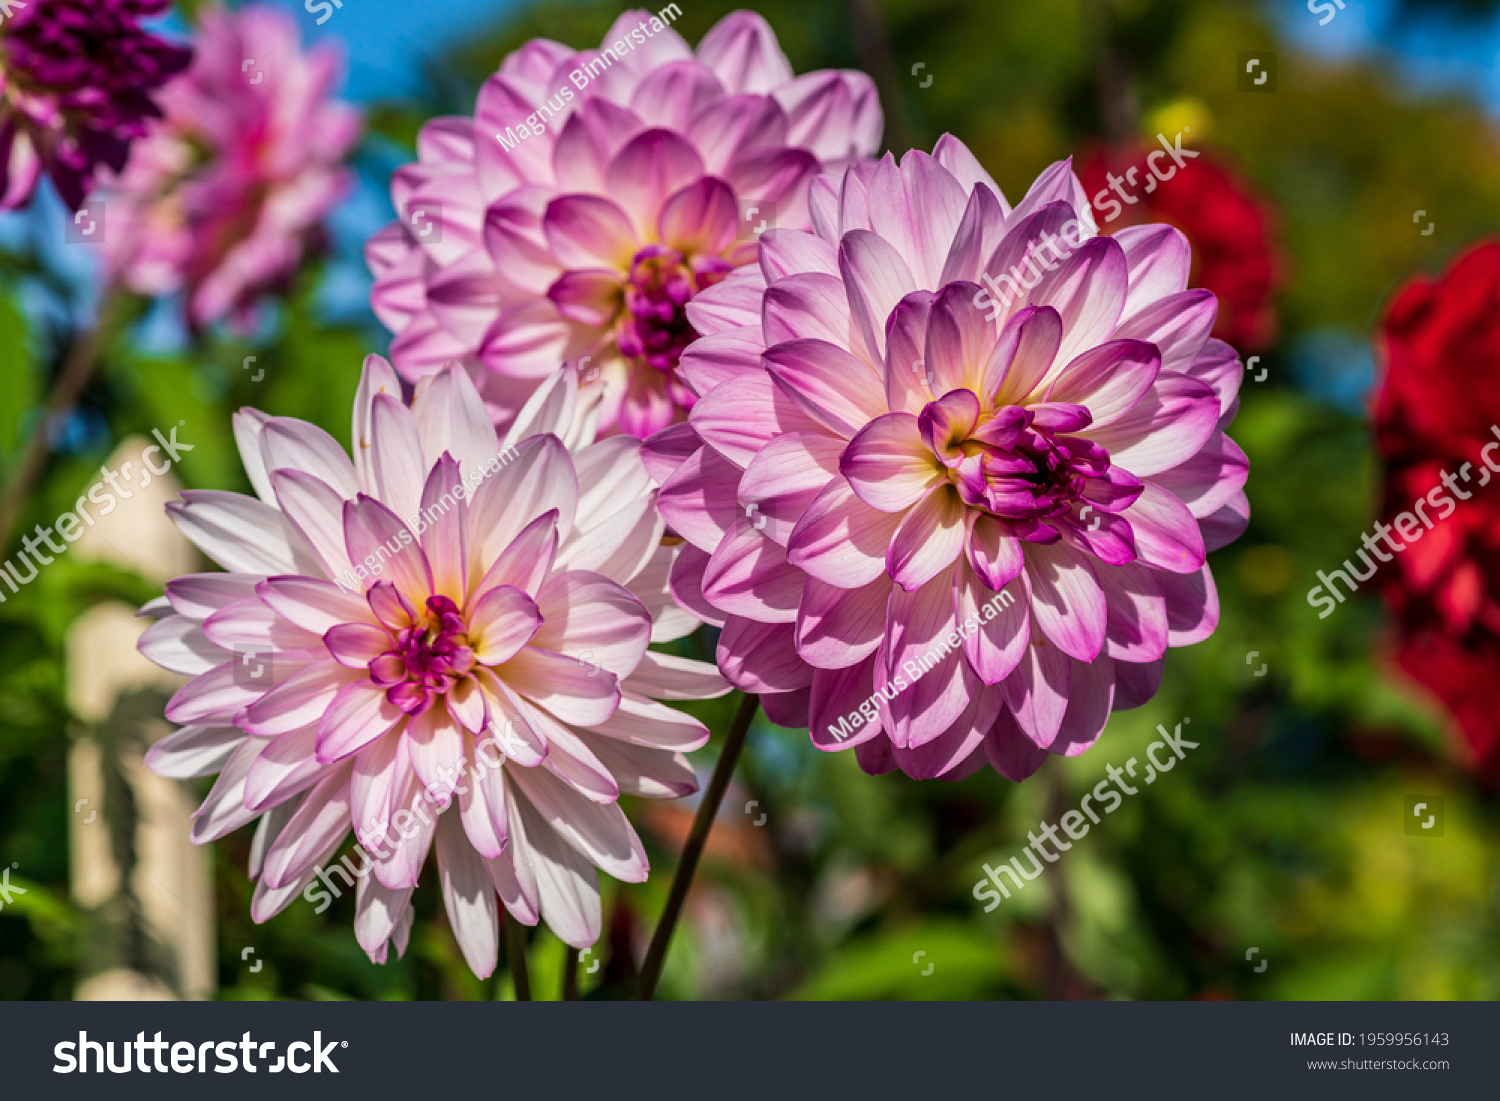 Close up of three pink and white Dahlia flowers in sunlight, with other colorful flowers in the soft background #1959956143